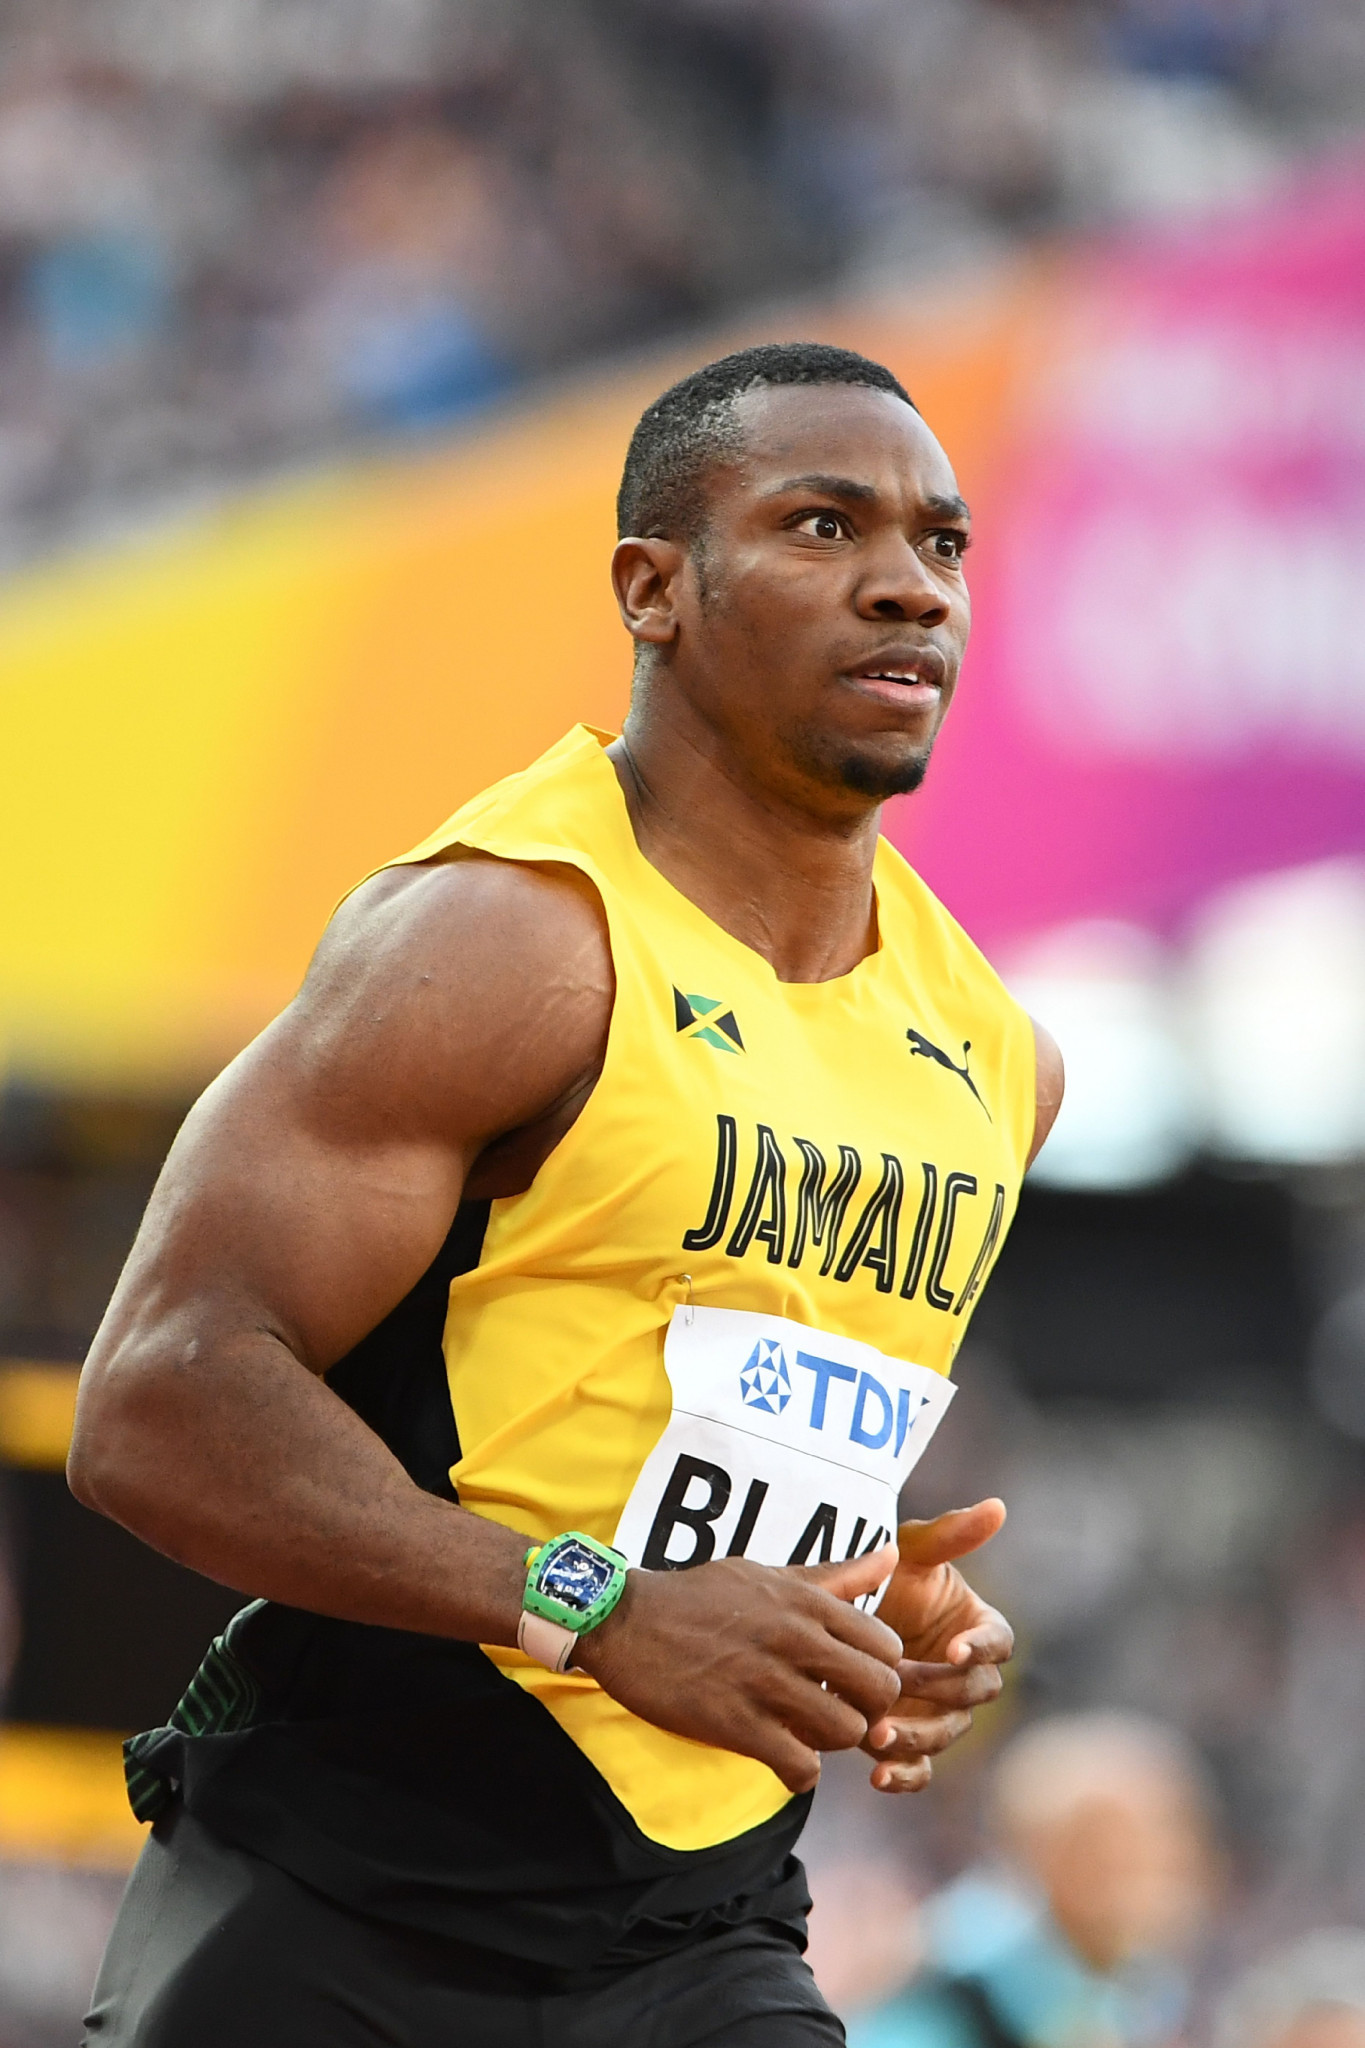 Yohan Blake has been warned by Usain Bolt that he has to win the Commonwealth Games 100 metres title at Gold Coast 2018 or 